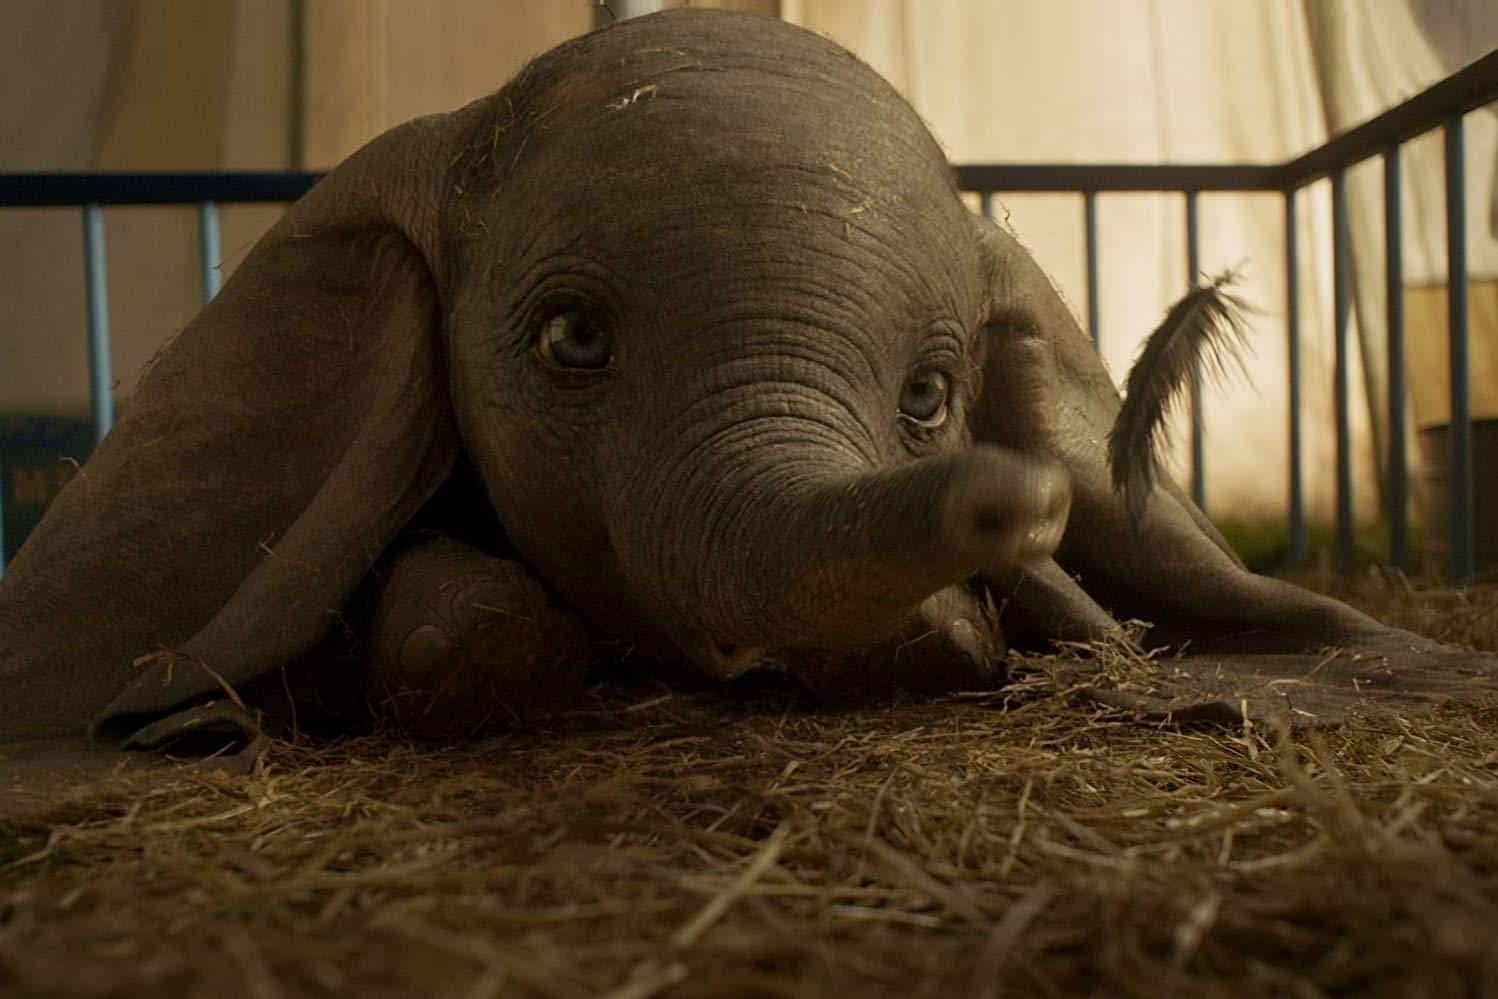 Dumbo Takes Flight in This New Clip from the Live-Action Remake